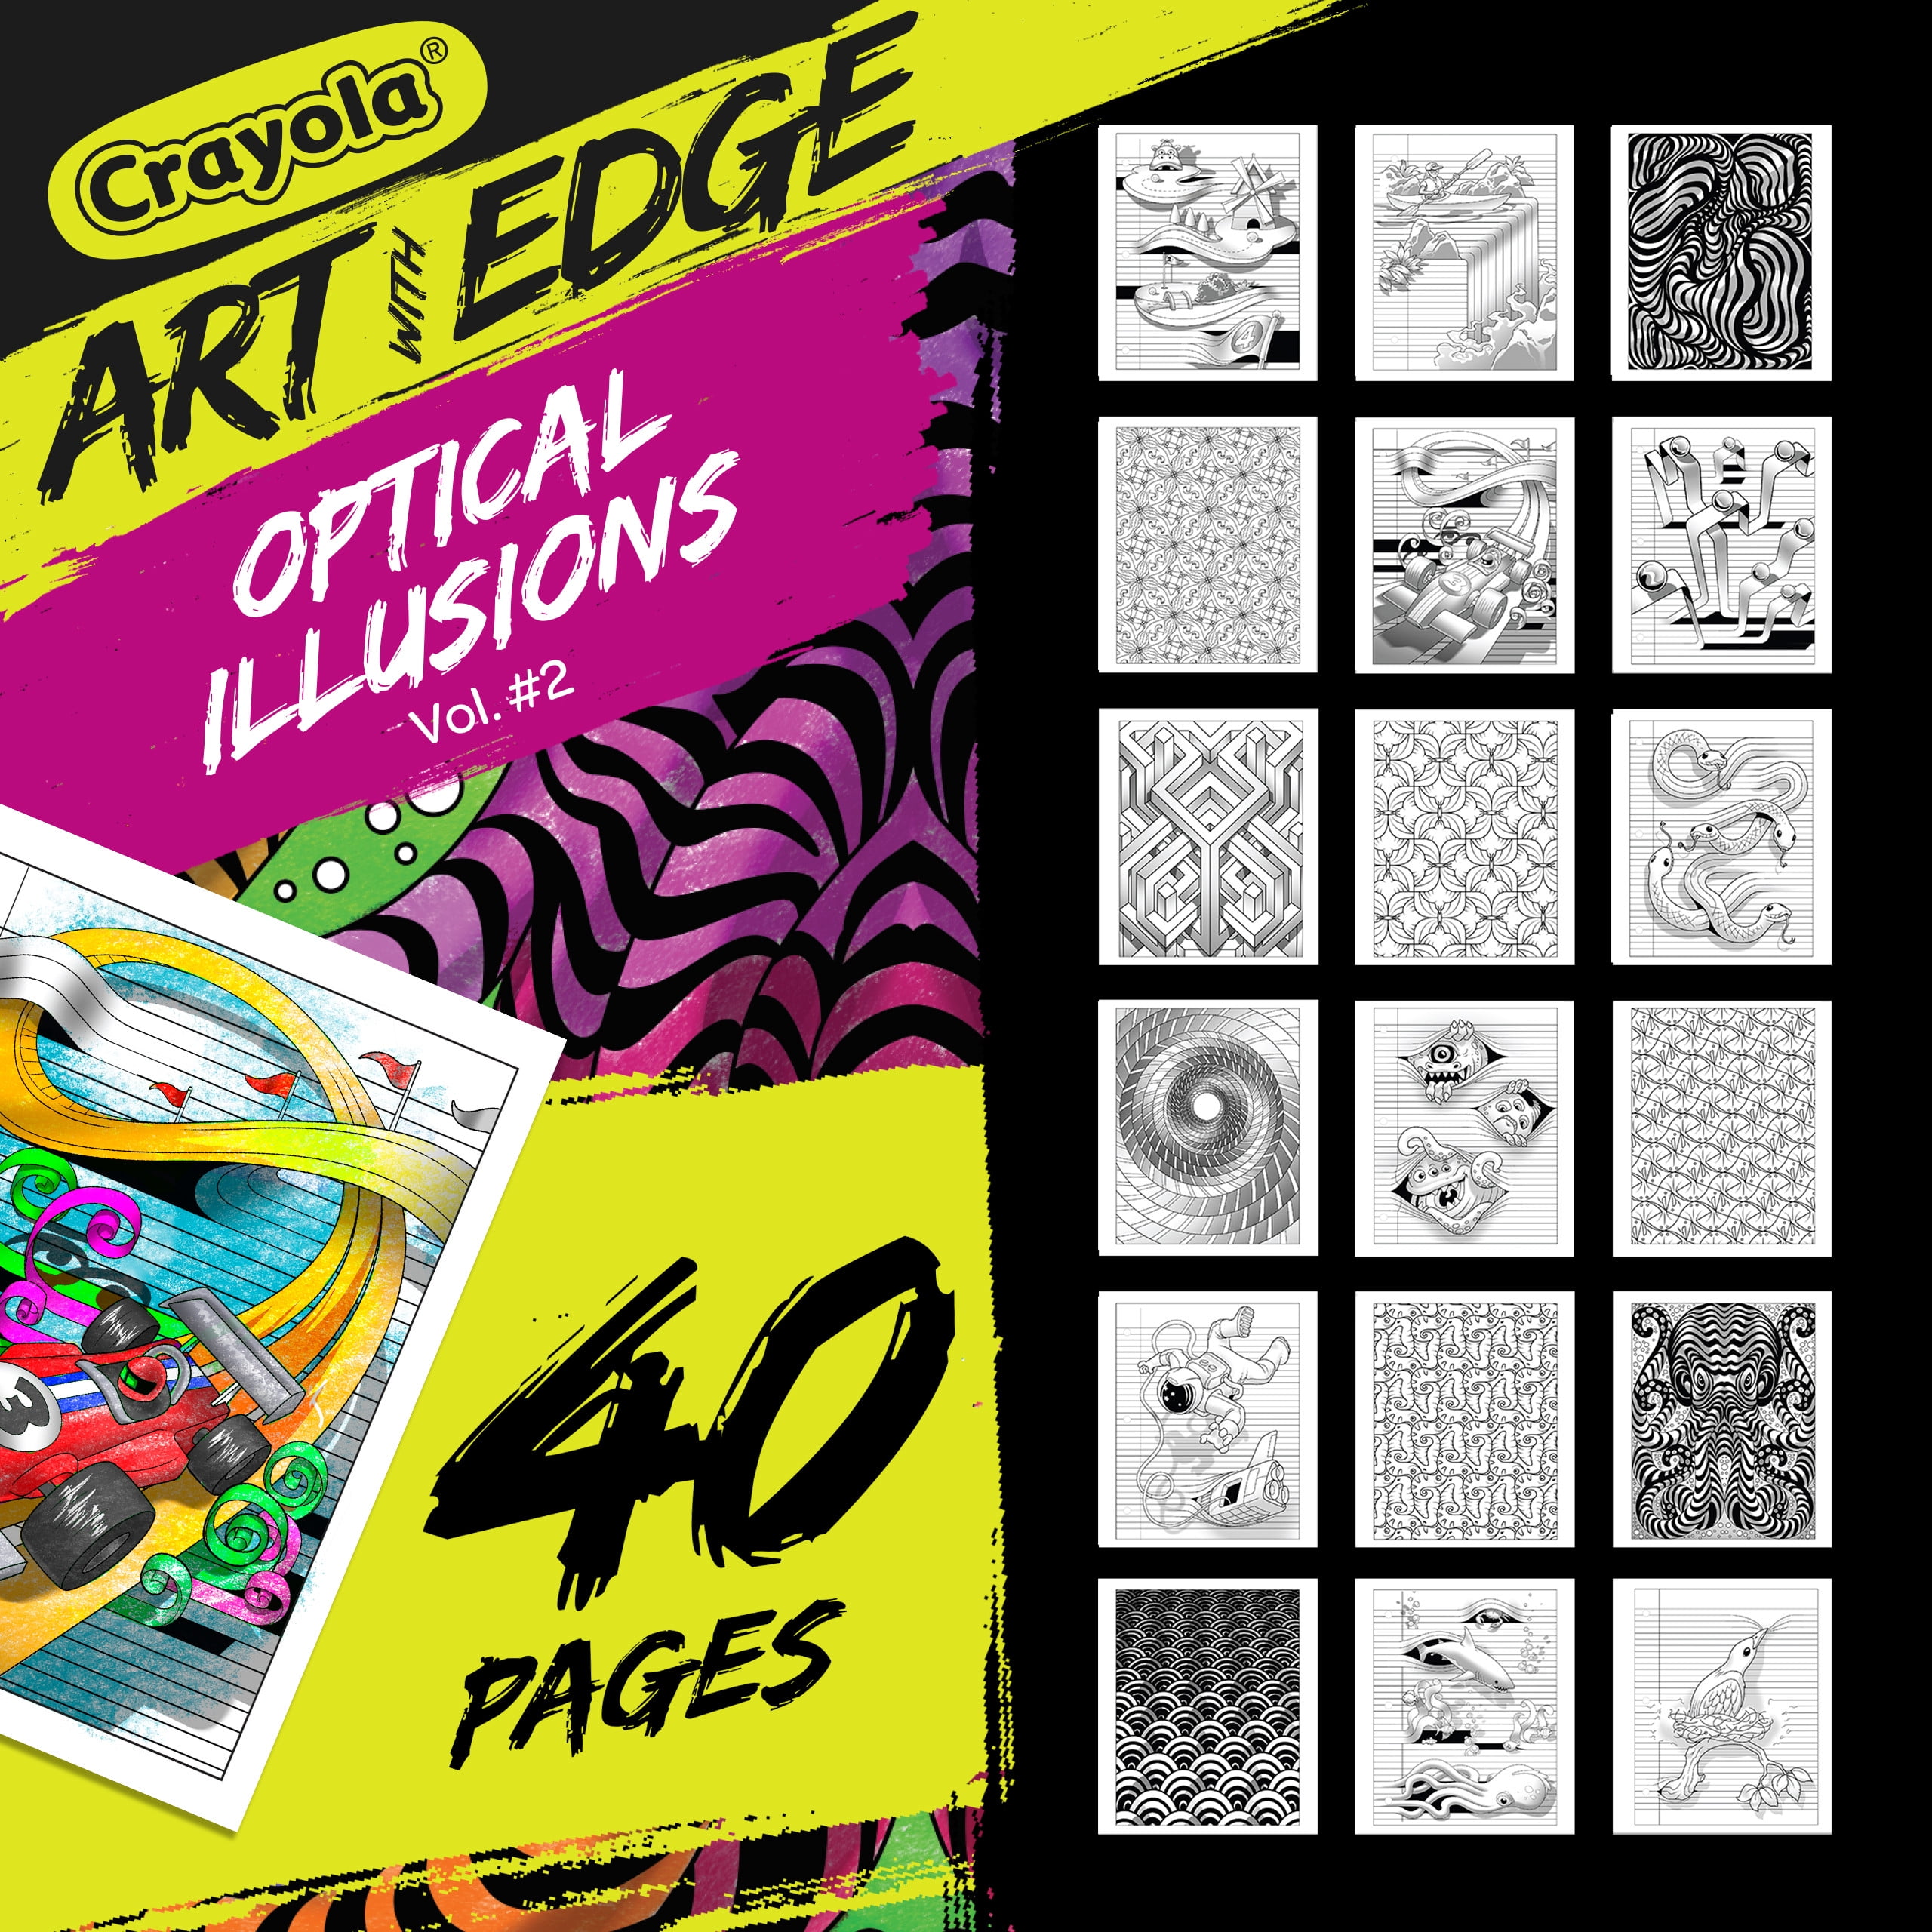  Crayola Art With Edge Optical Illusions Coloring Pages (40pgs),  Adult Coloring, 3D Art, Gift for Teens & Adults